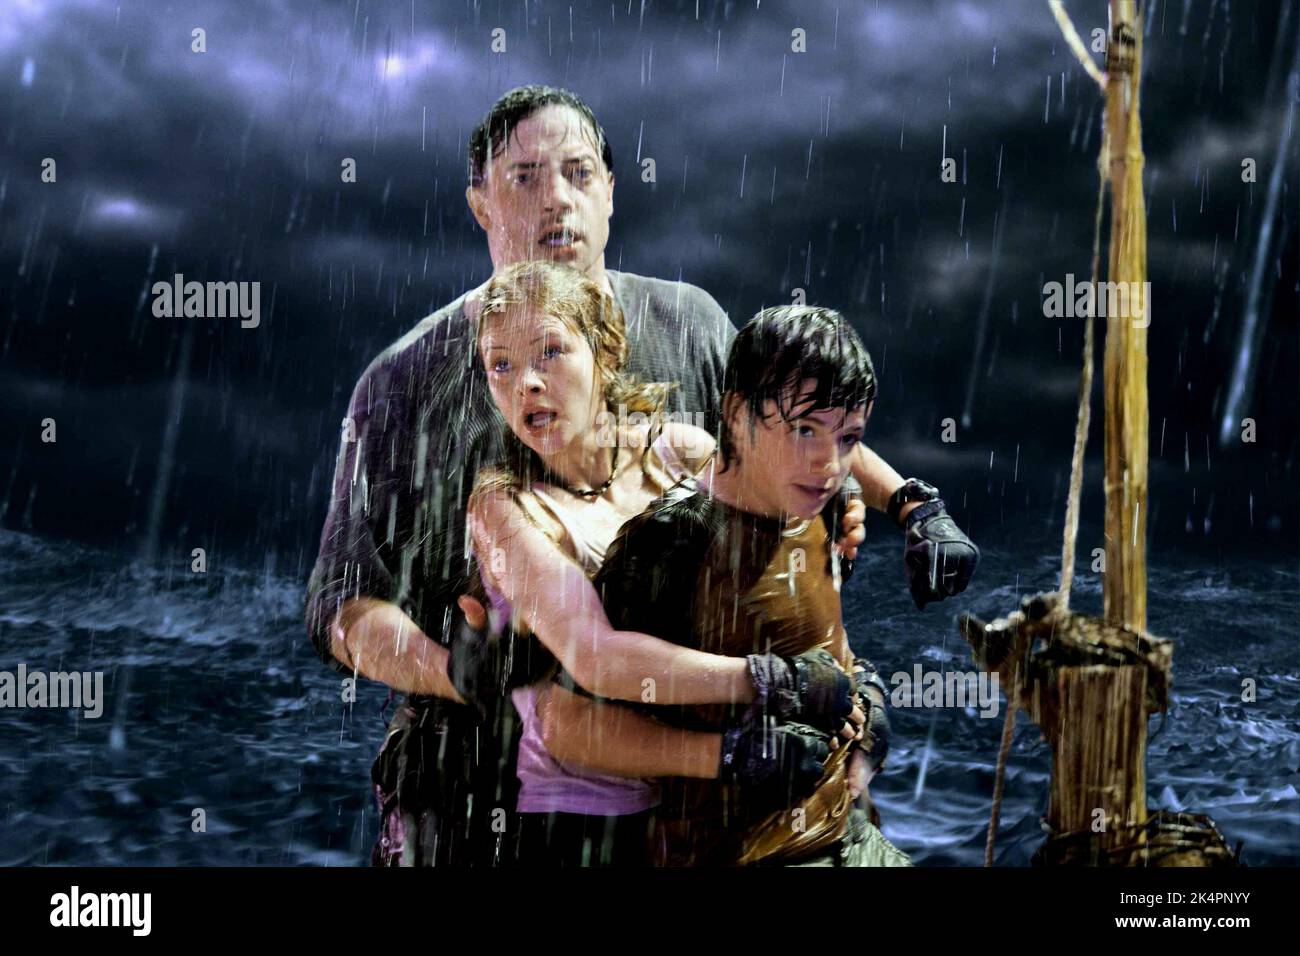 FRASER,BRIEM,HUTCHERSON, JOURNEY TO THE CENTER OF THE EARTH, 2008 Stock Photo